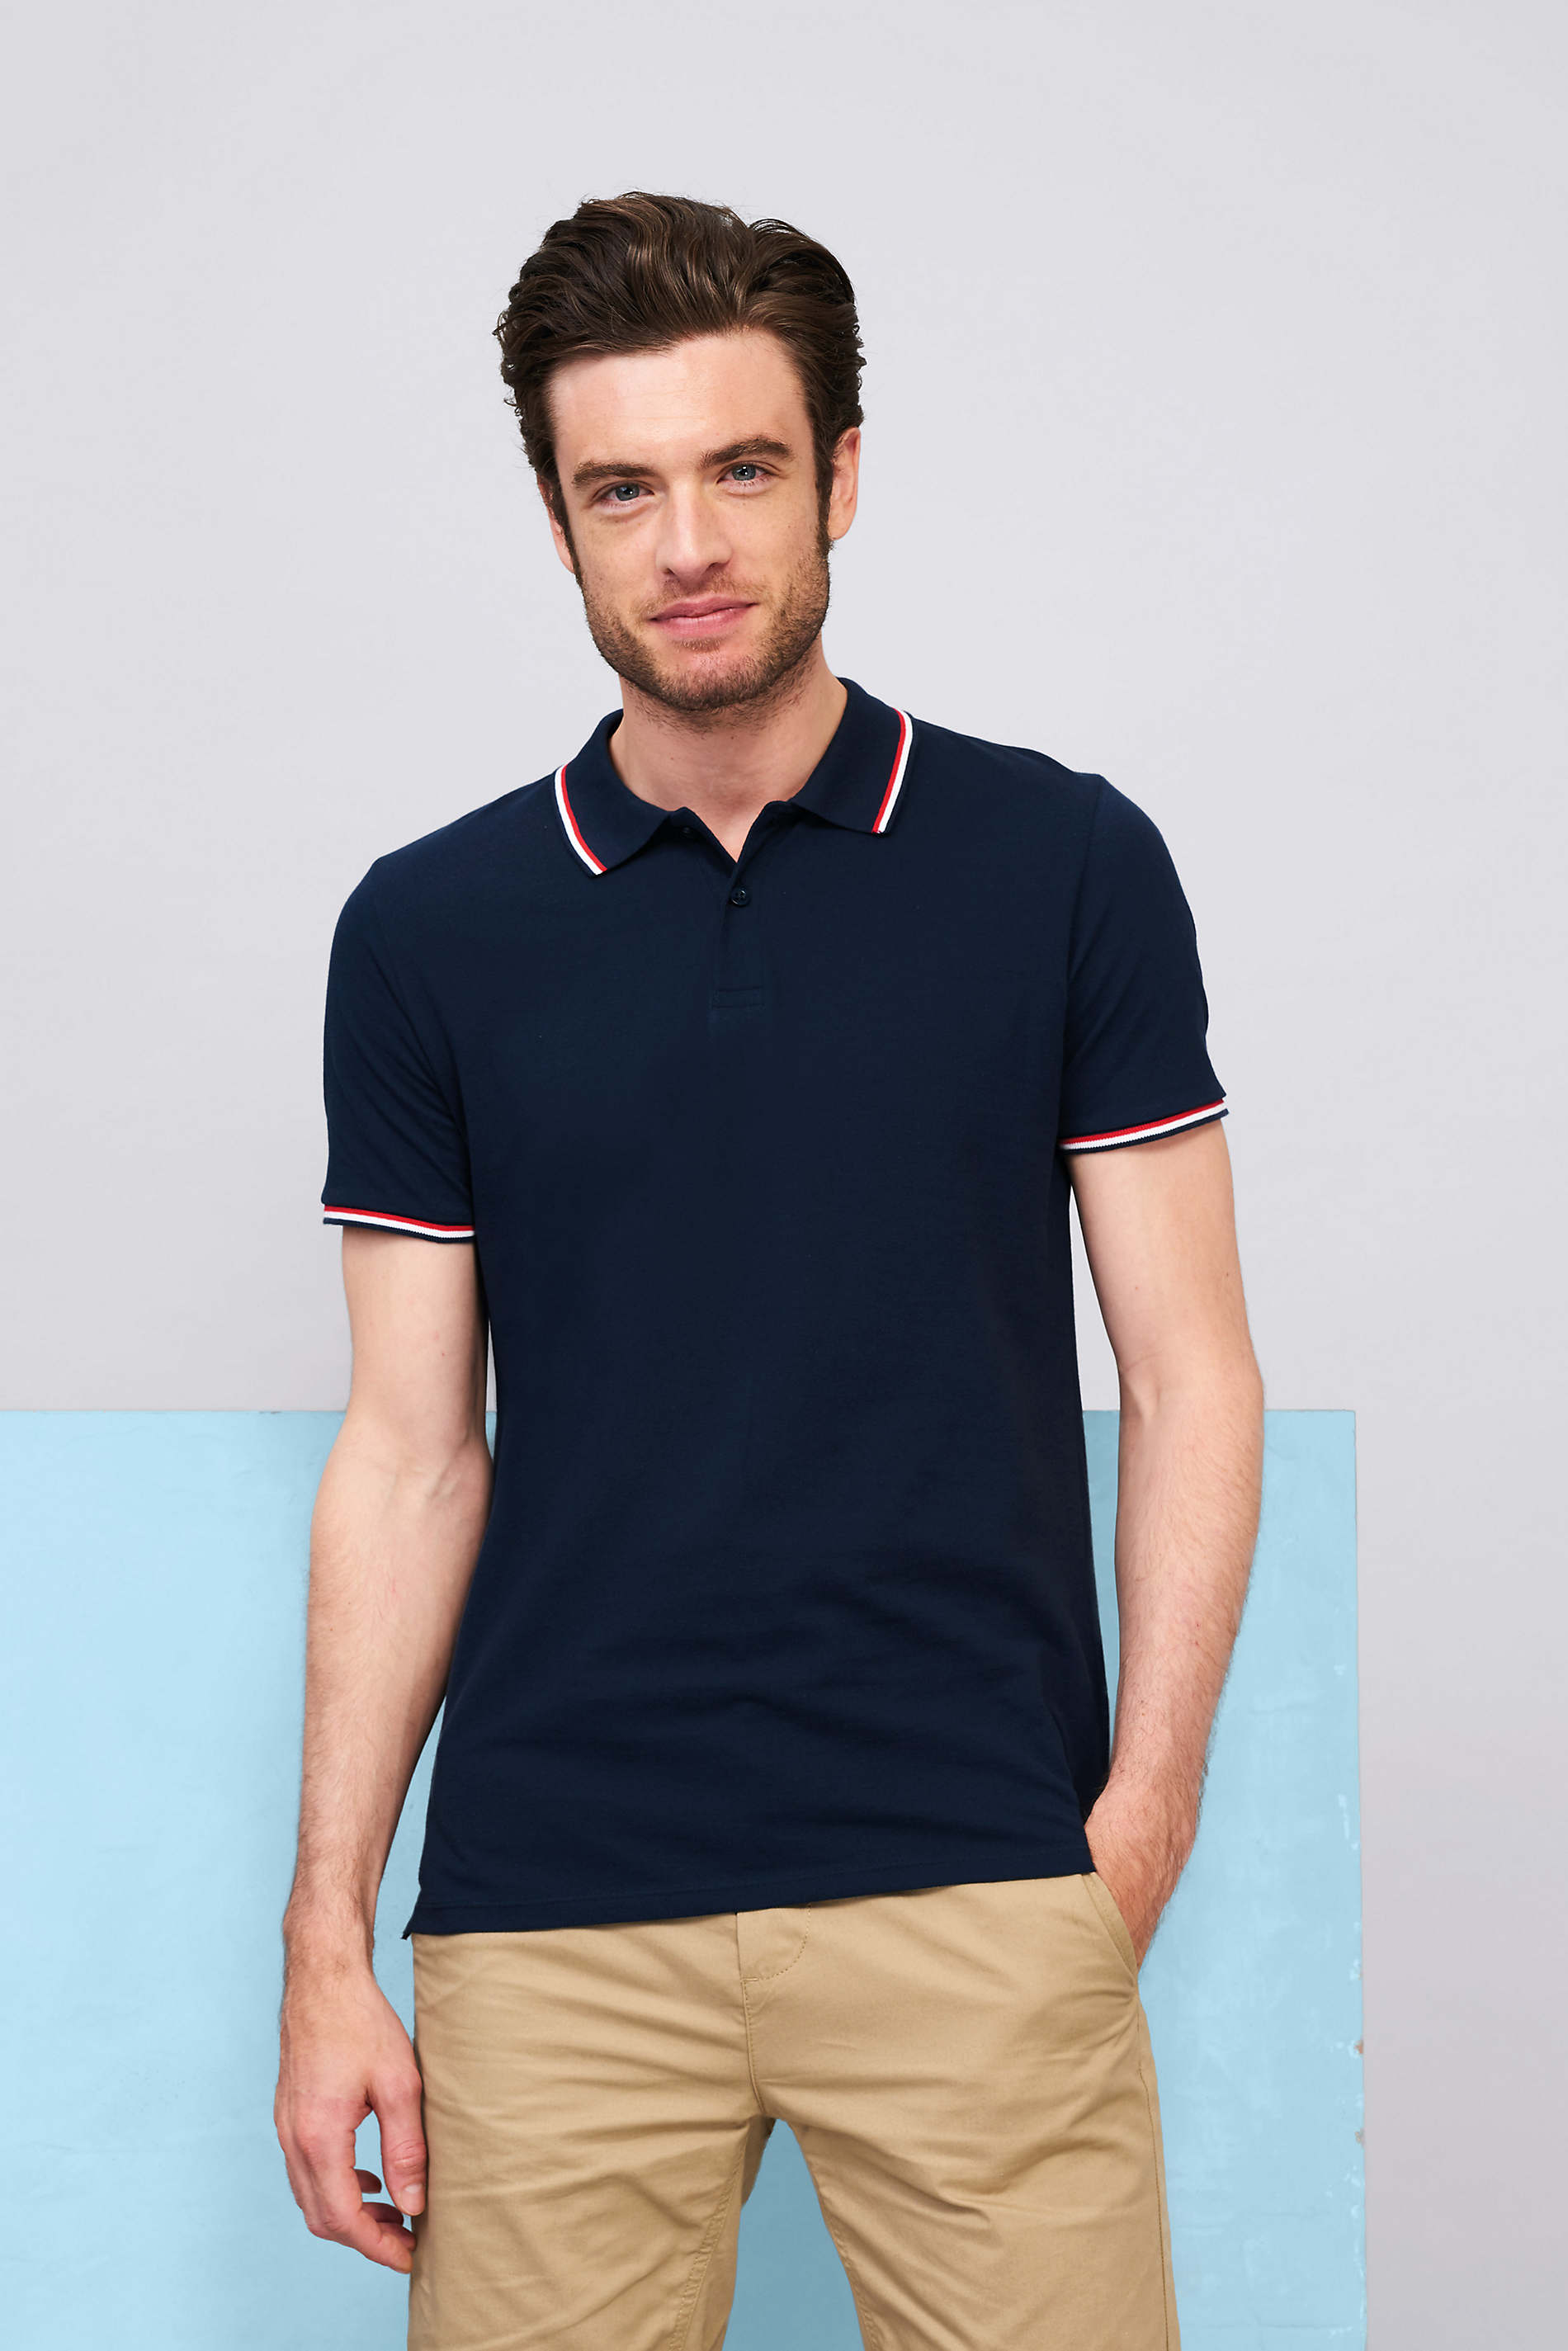 PRESTIGE MEN - Wholesale and retail of corporate clothing.